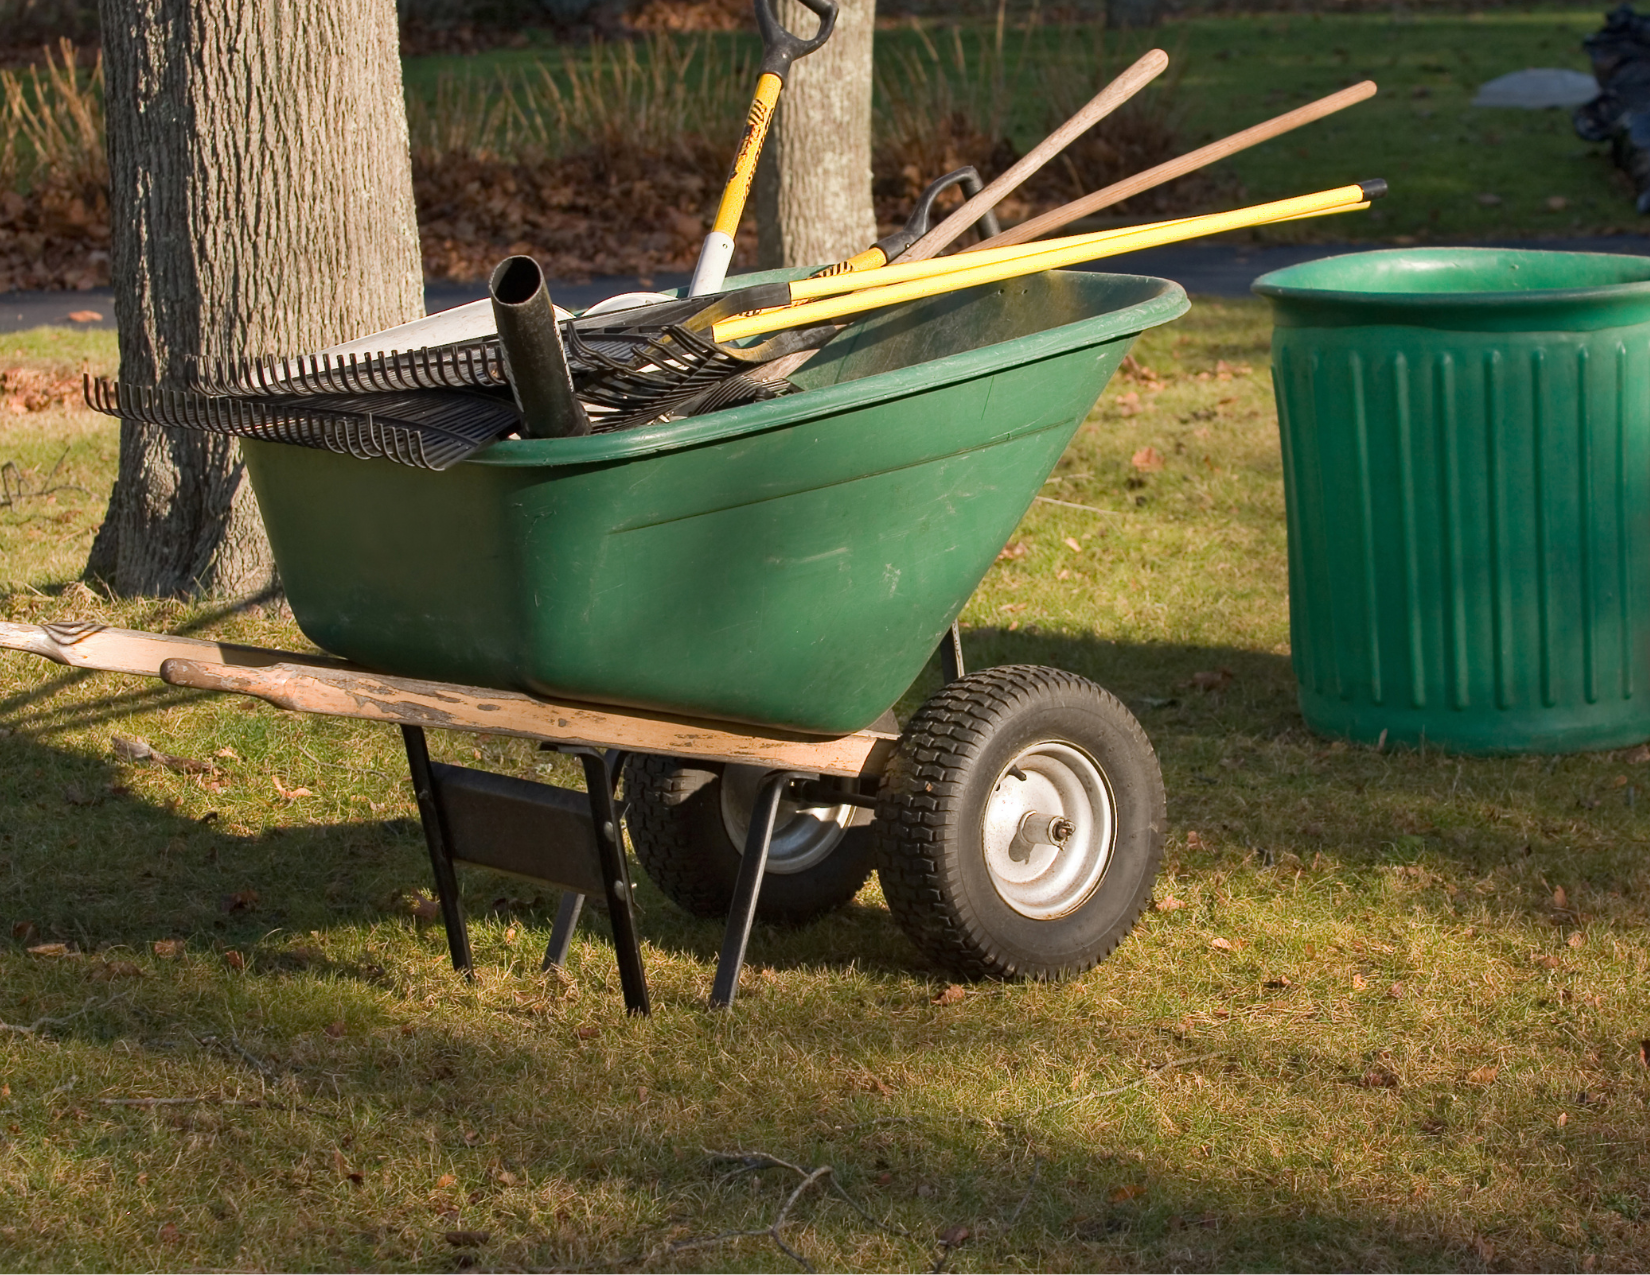 Wheelbarrow full of tools for yard cleanup